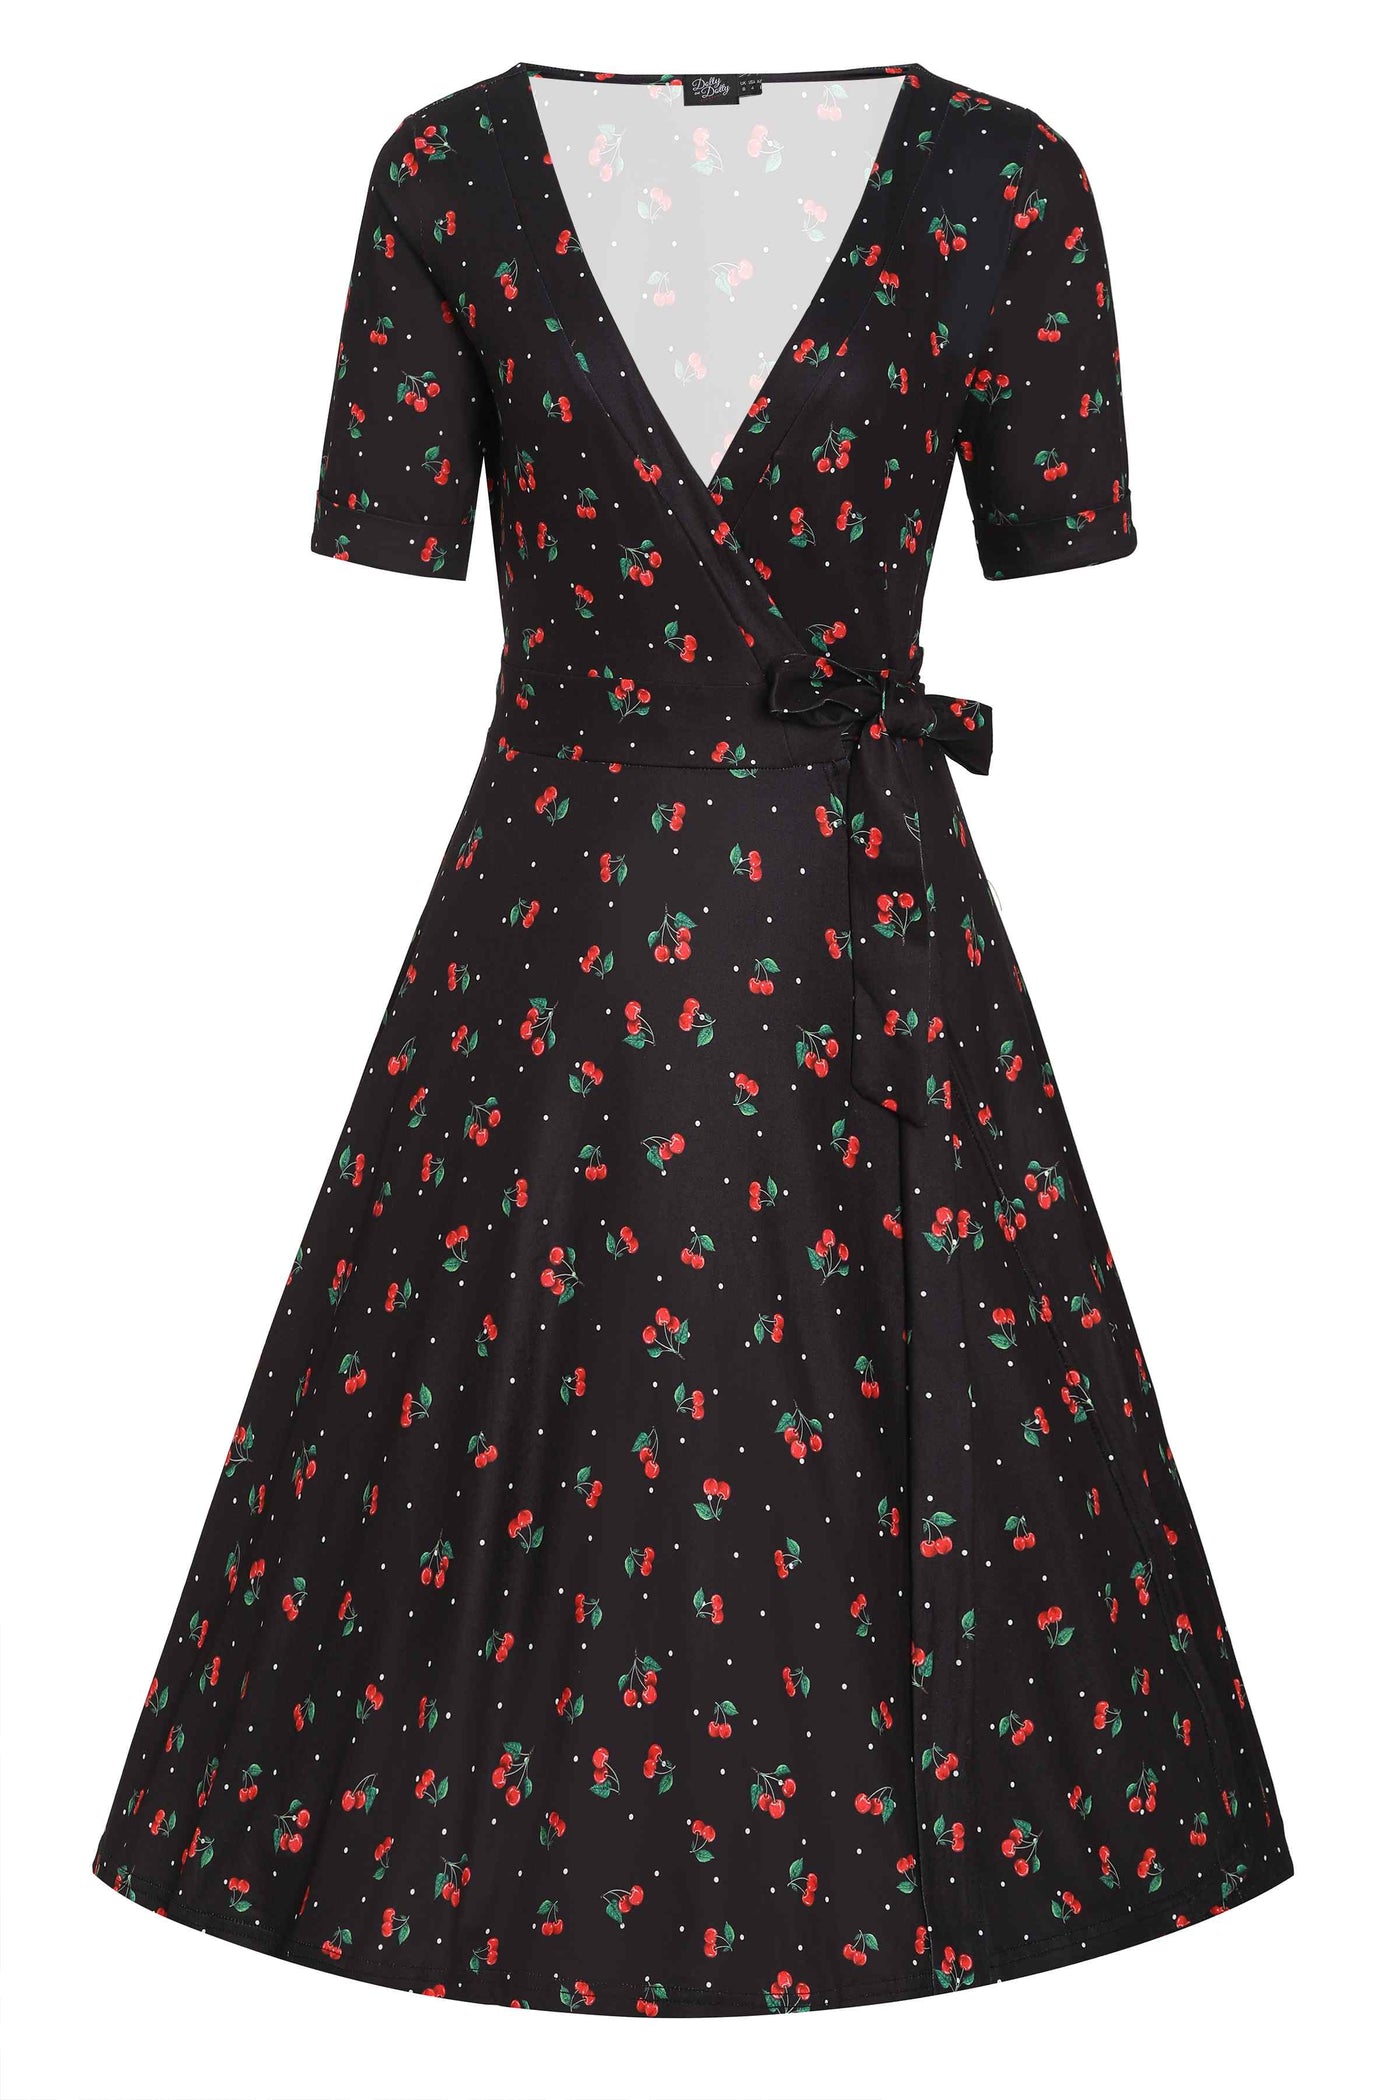 Front view of our Matilda short sleeved wrap dress in black, with red cherries print